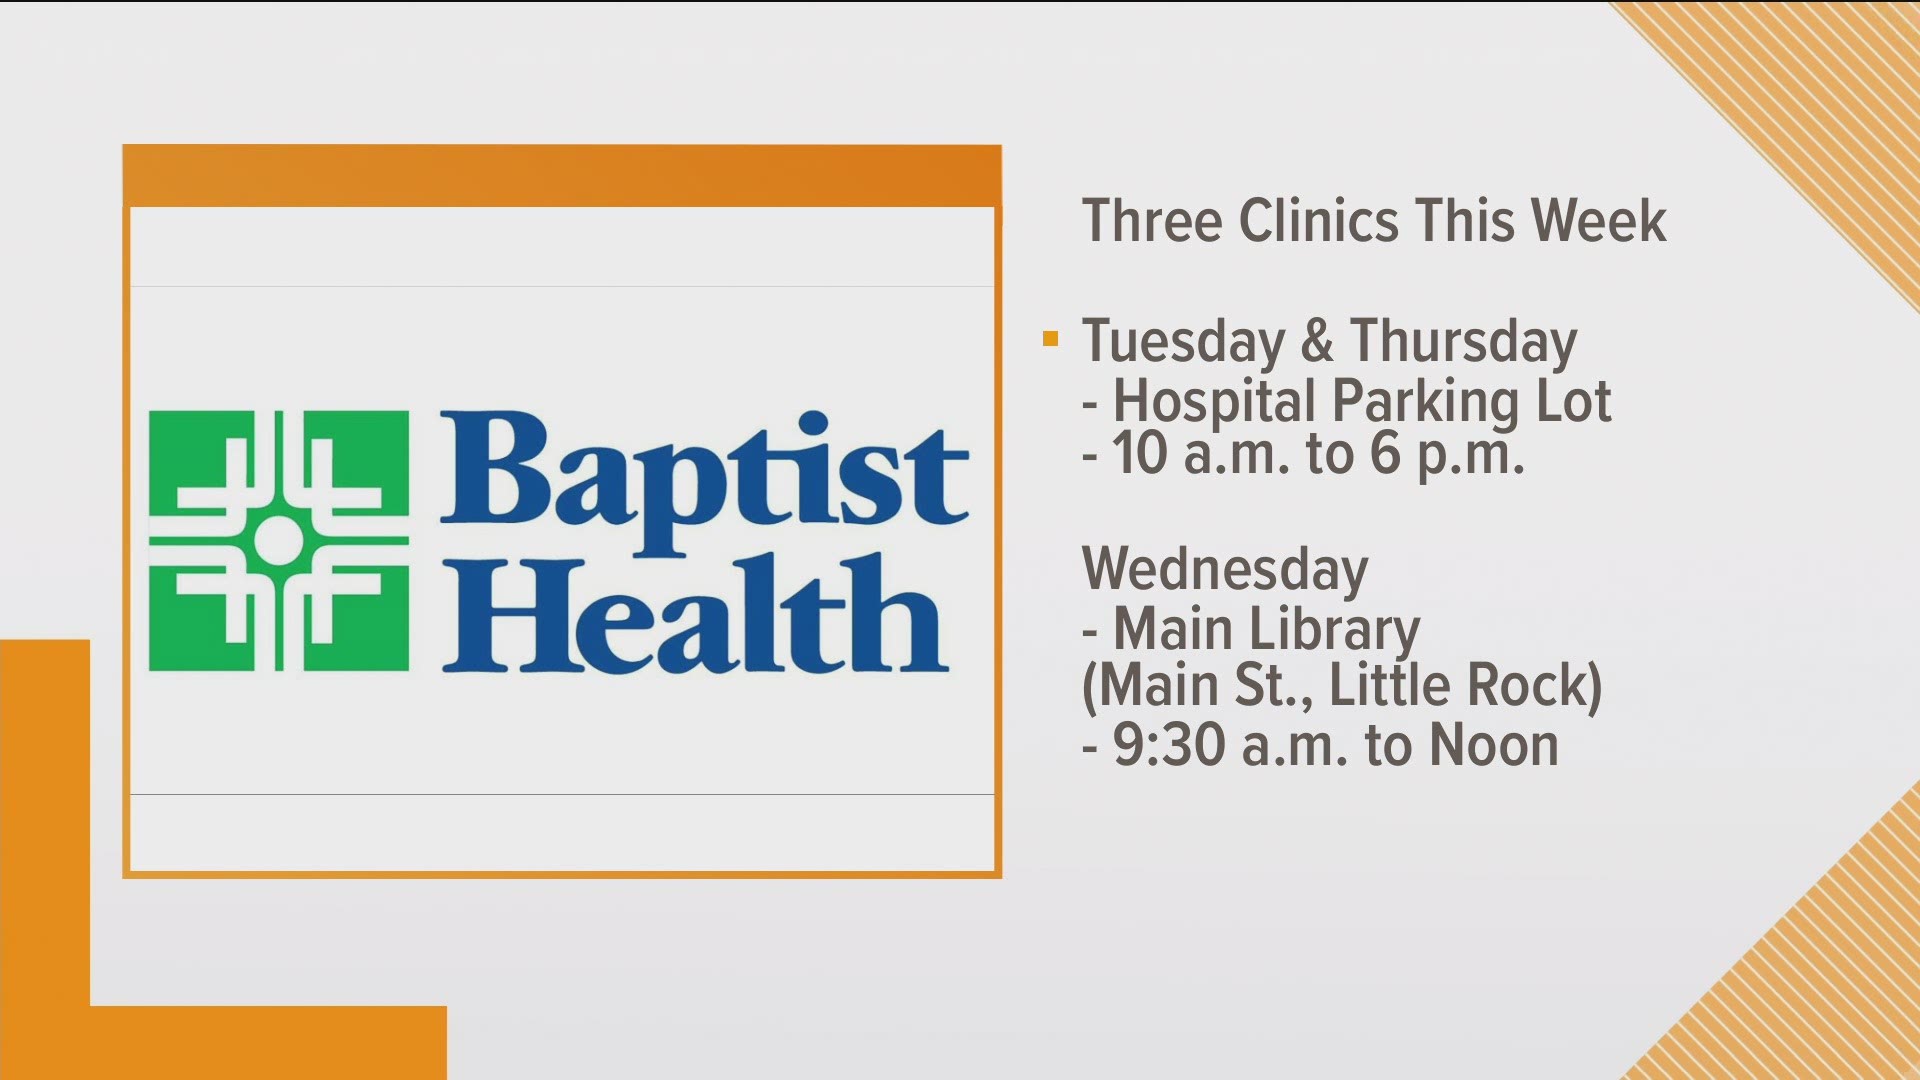 If you're looking to get vaccinated this week, there are multiple opportunities to get the one dose Johnson & Johnson shot through Baptist Health.